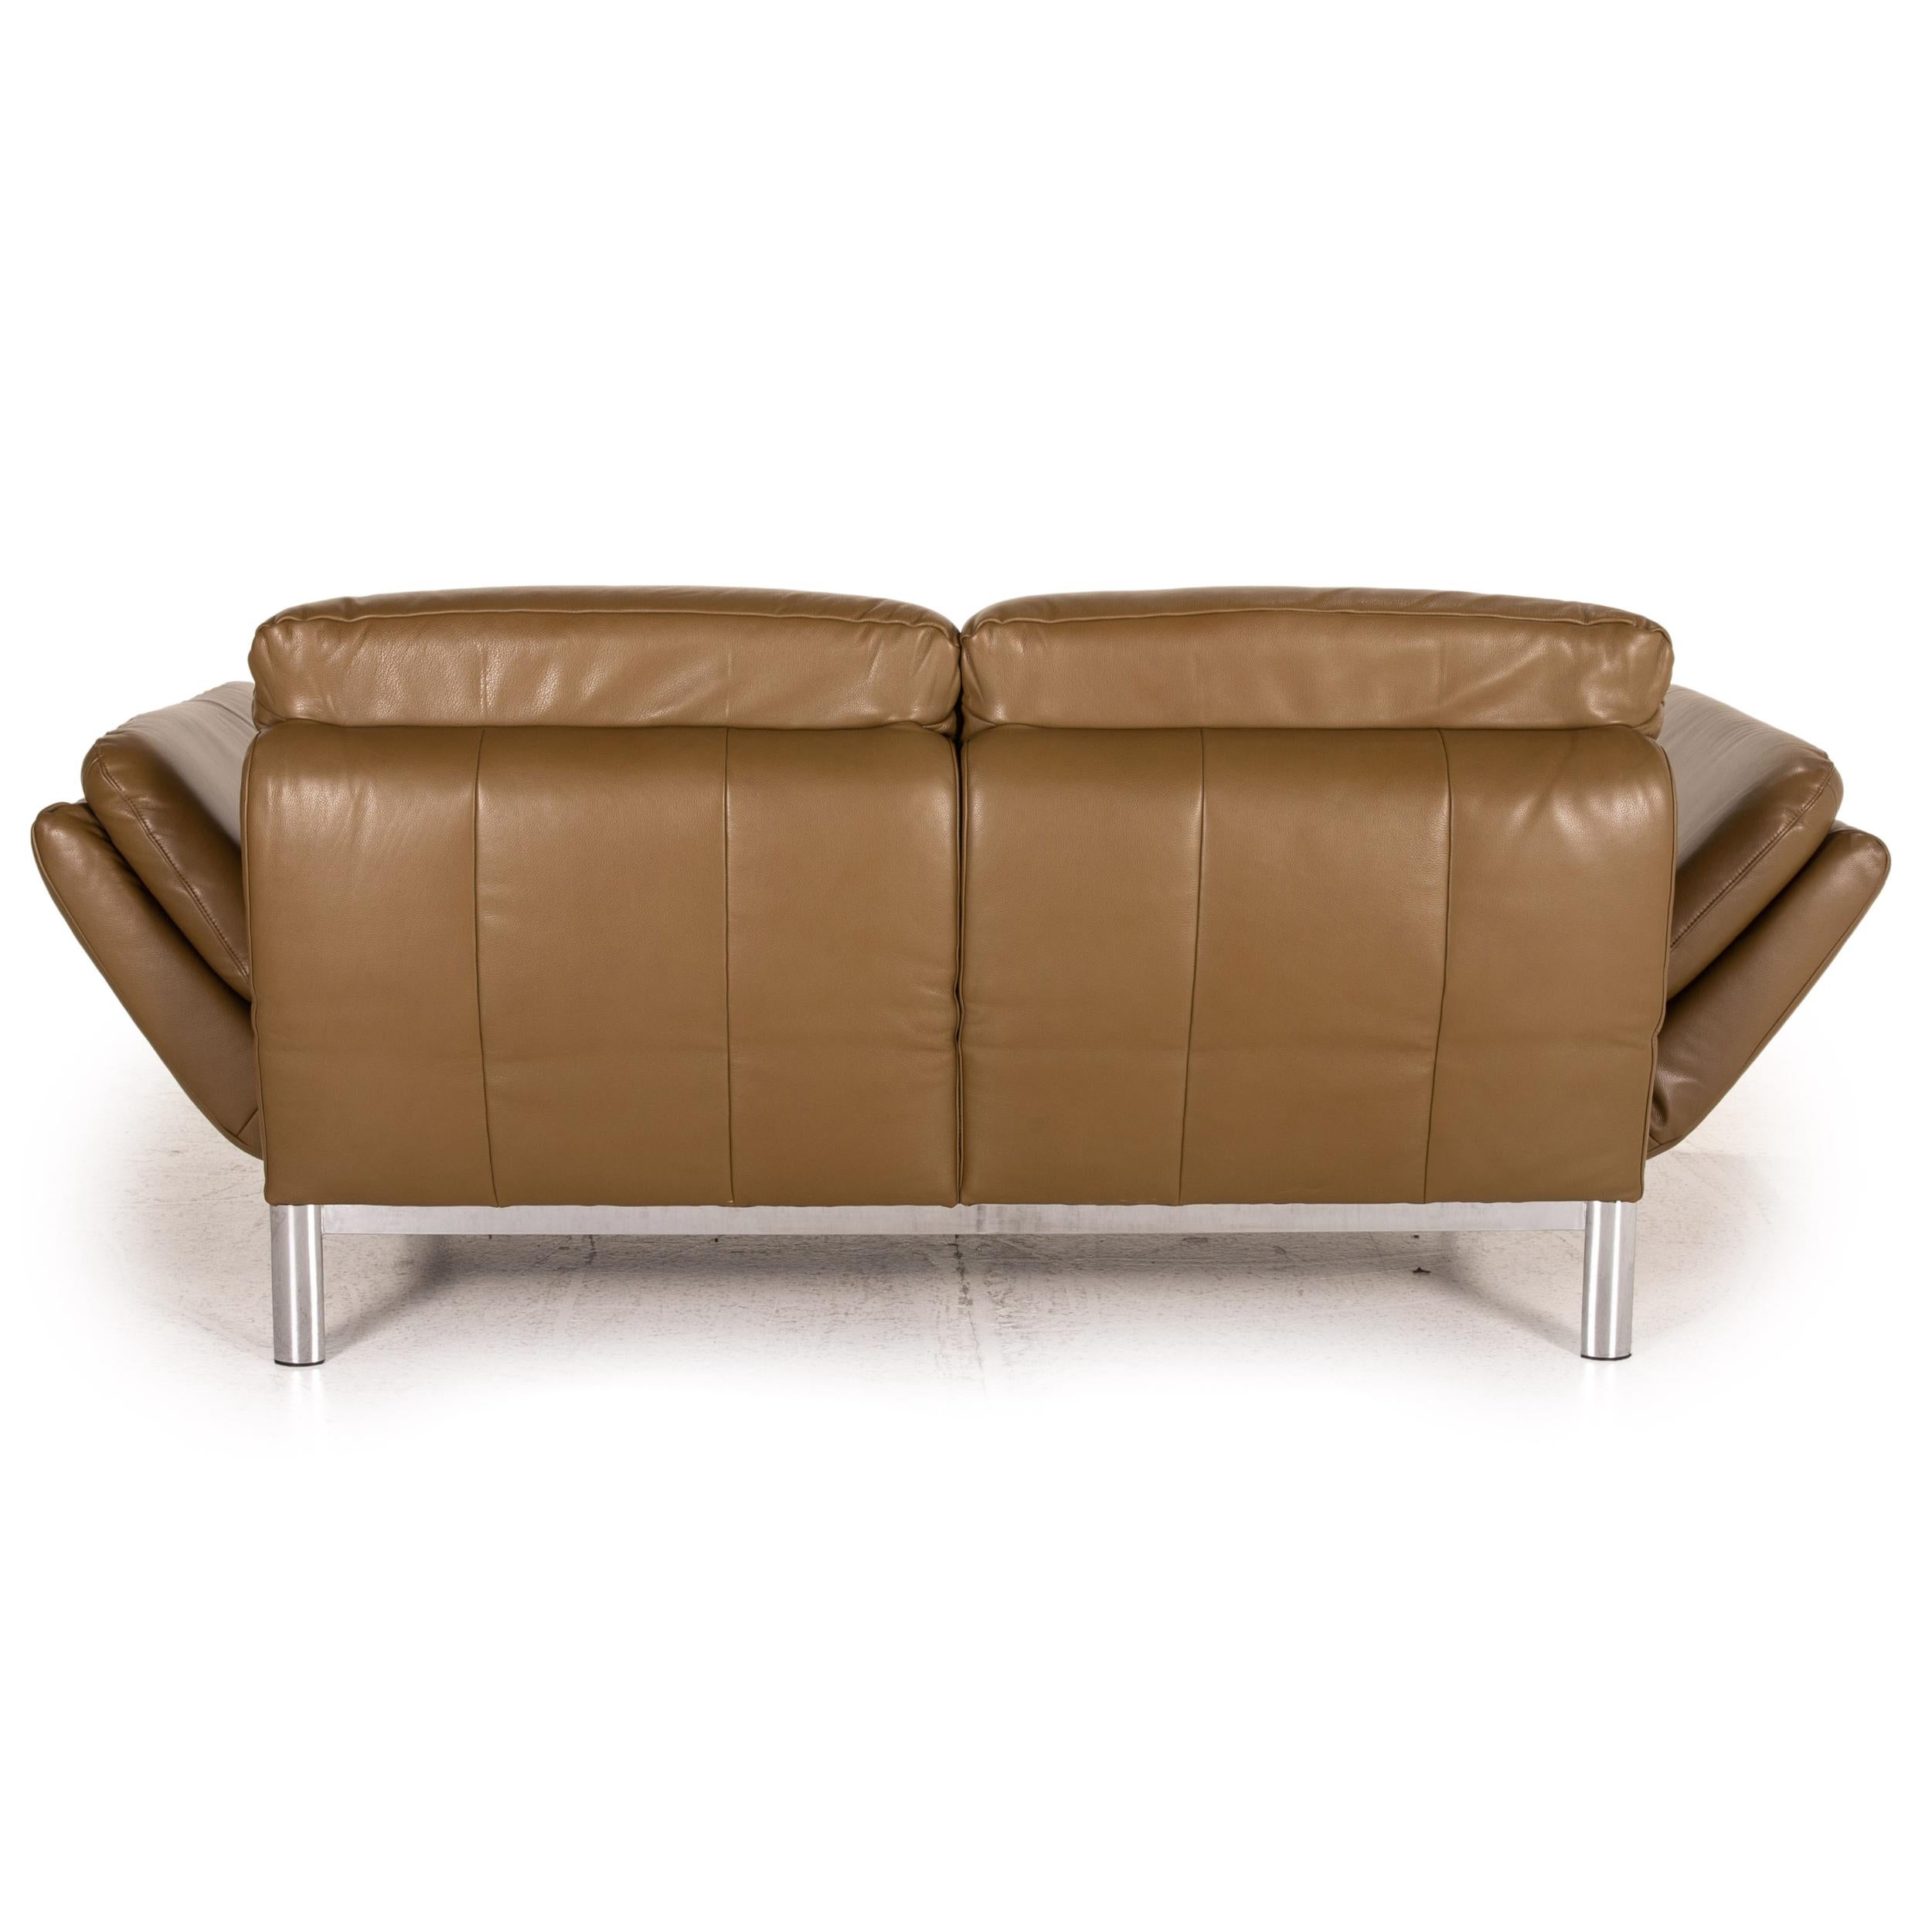 Musterring MR 675 Leather Sofa Green Olive Two-Seater Function Relax Function 2